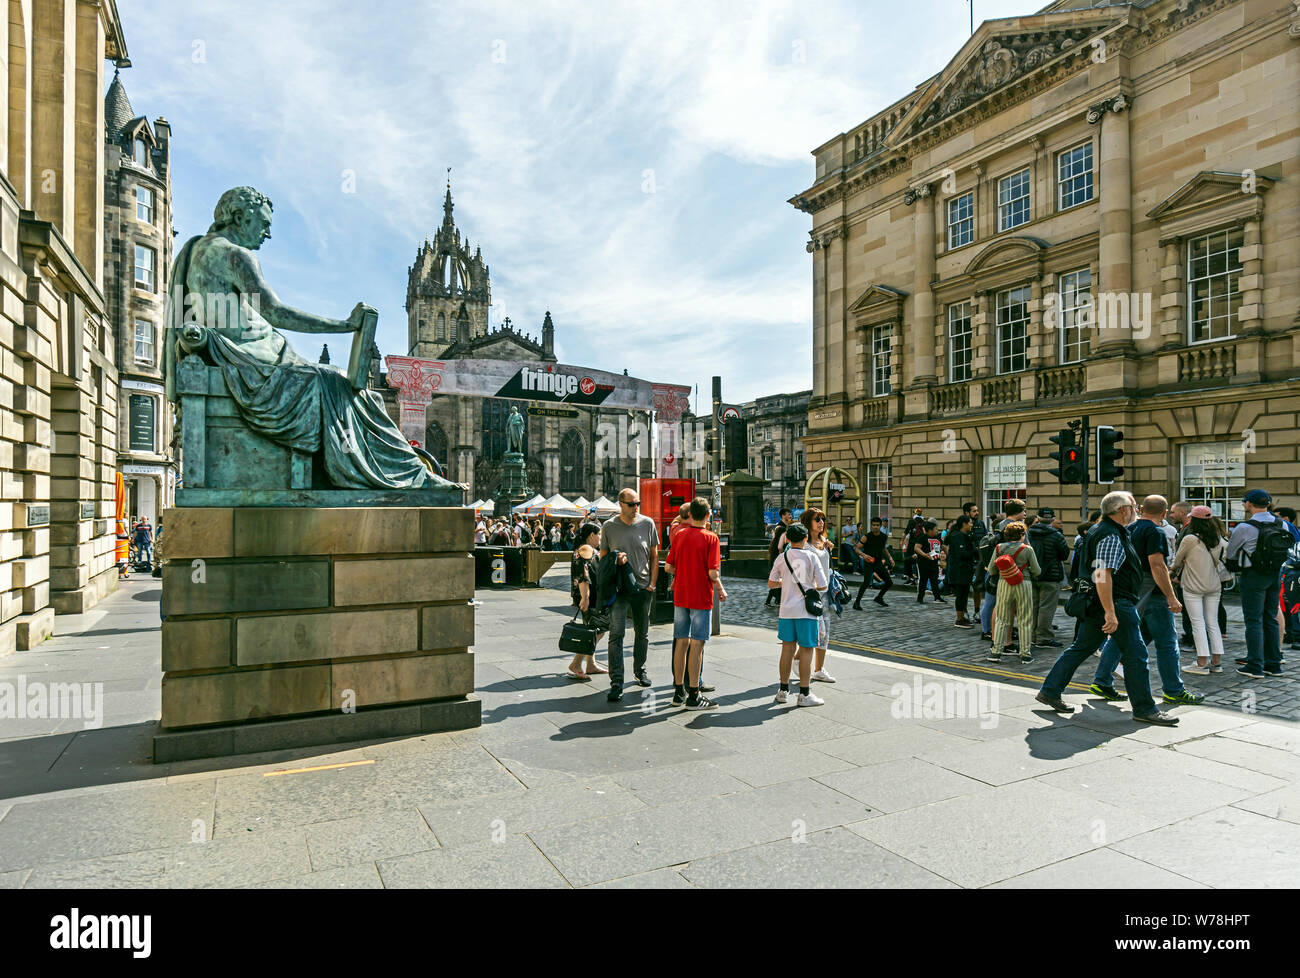 David Hume contemplating the activities at his feet during the Edinburgh Festival Fringe 2019 in the Royal Mile Edinburgh Scotland UK Stock Photo